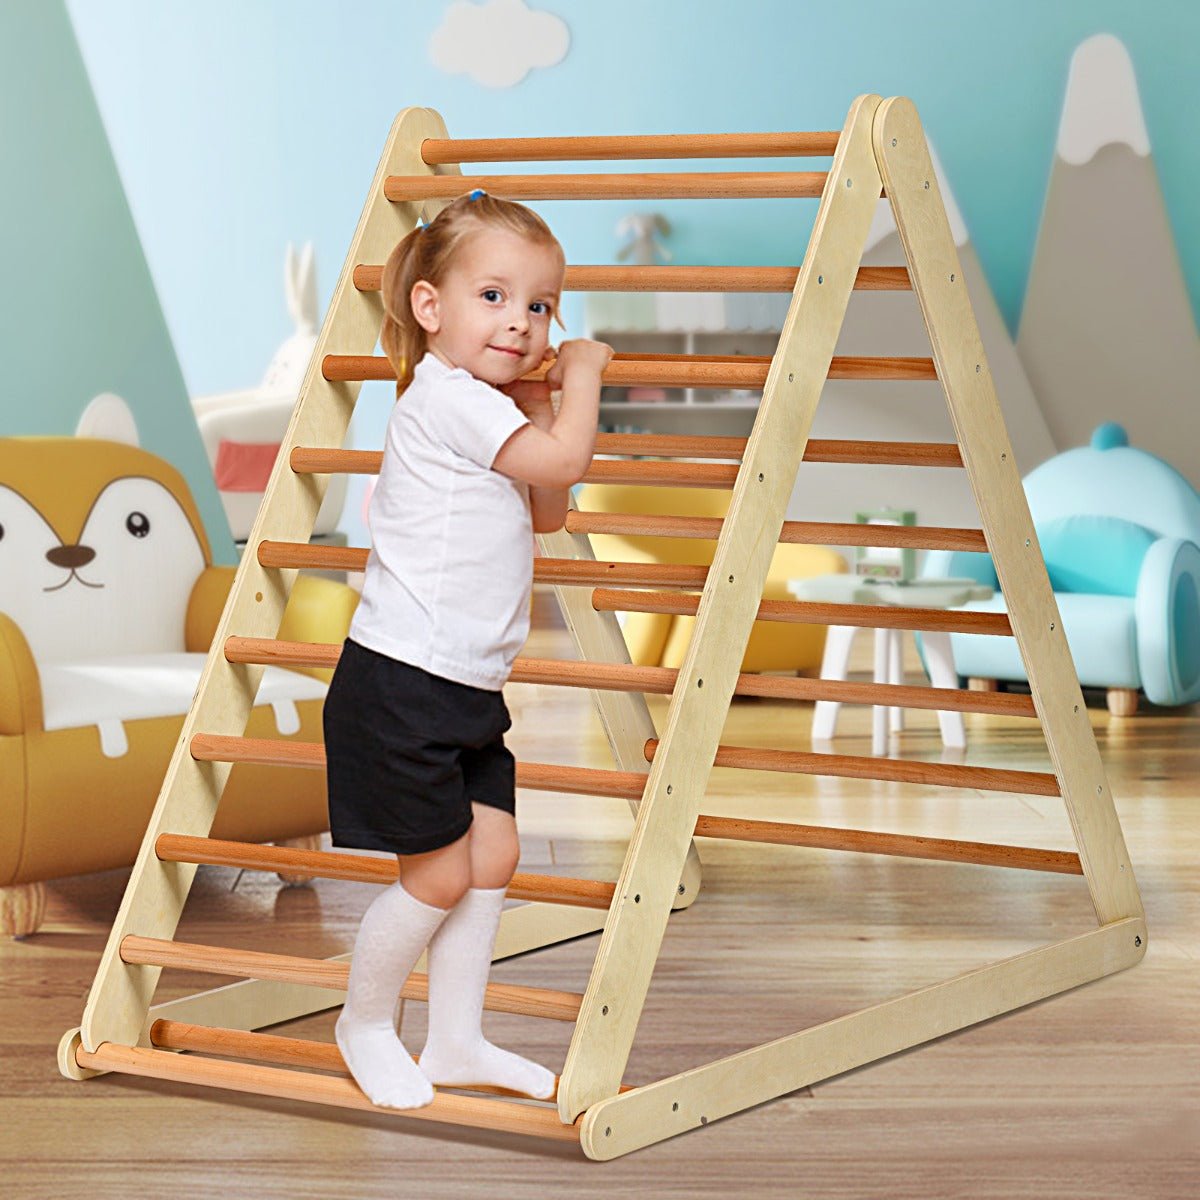 Wooden Climbing Triangle Ladder - Secure and Natural Play Element